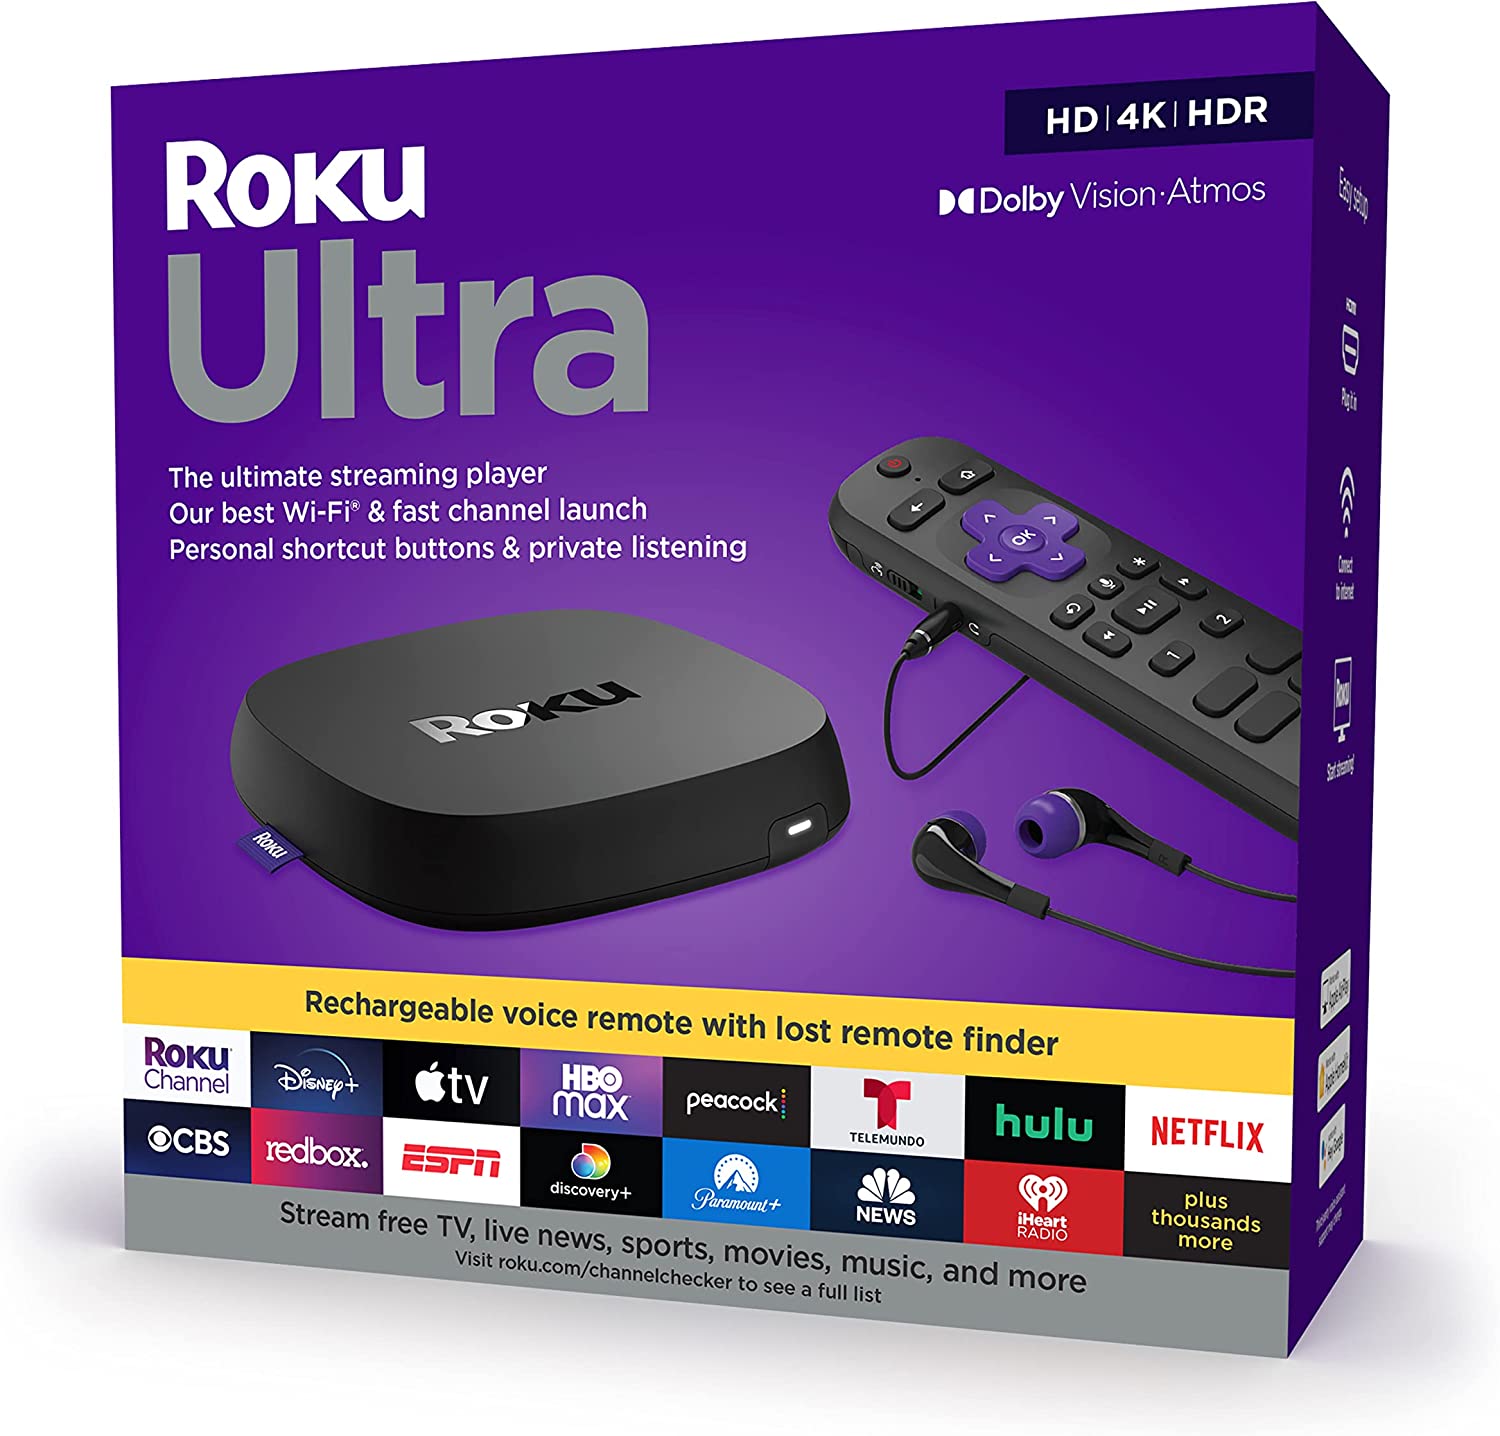 Giveaway! Enter Now to Win a 2022 Roku Ultra, $100 Netflix Gift Card, & $100 in Hulu Gift Cards! April 2023 Giveaway!